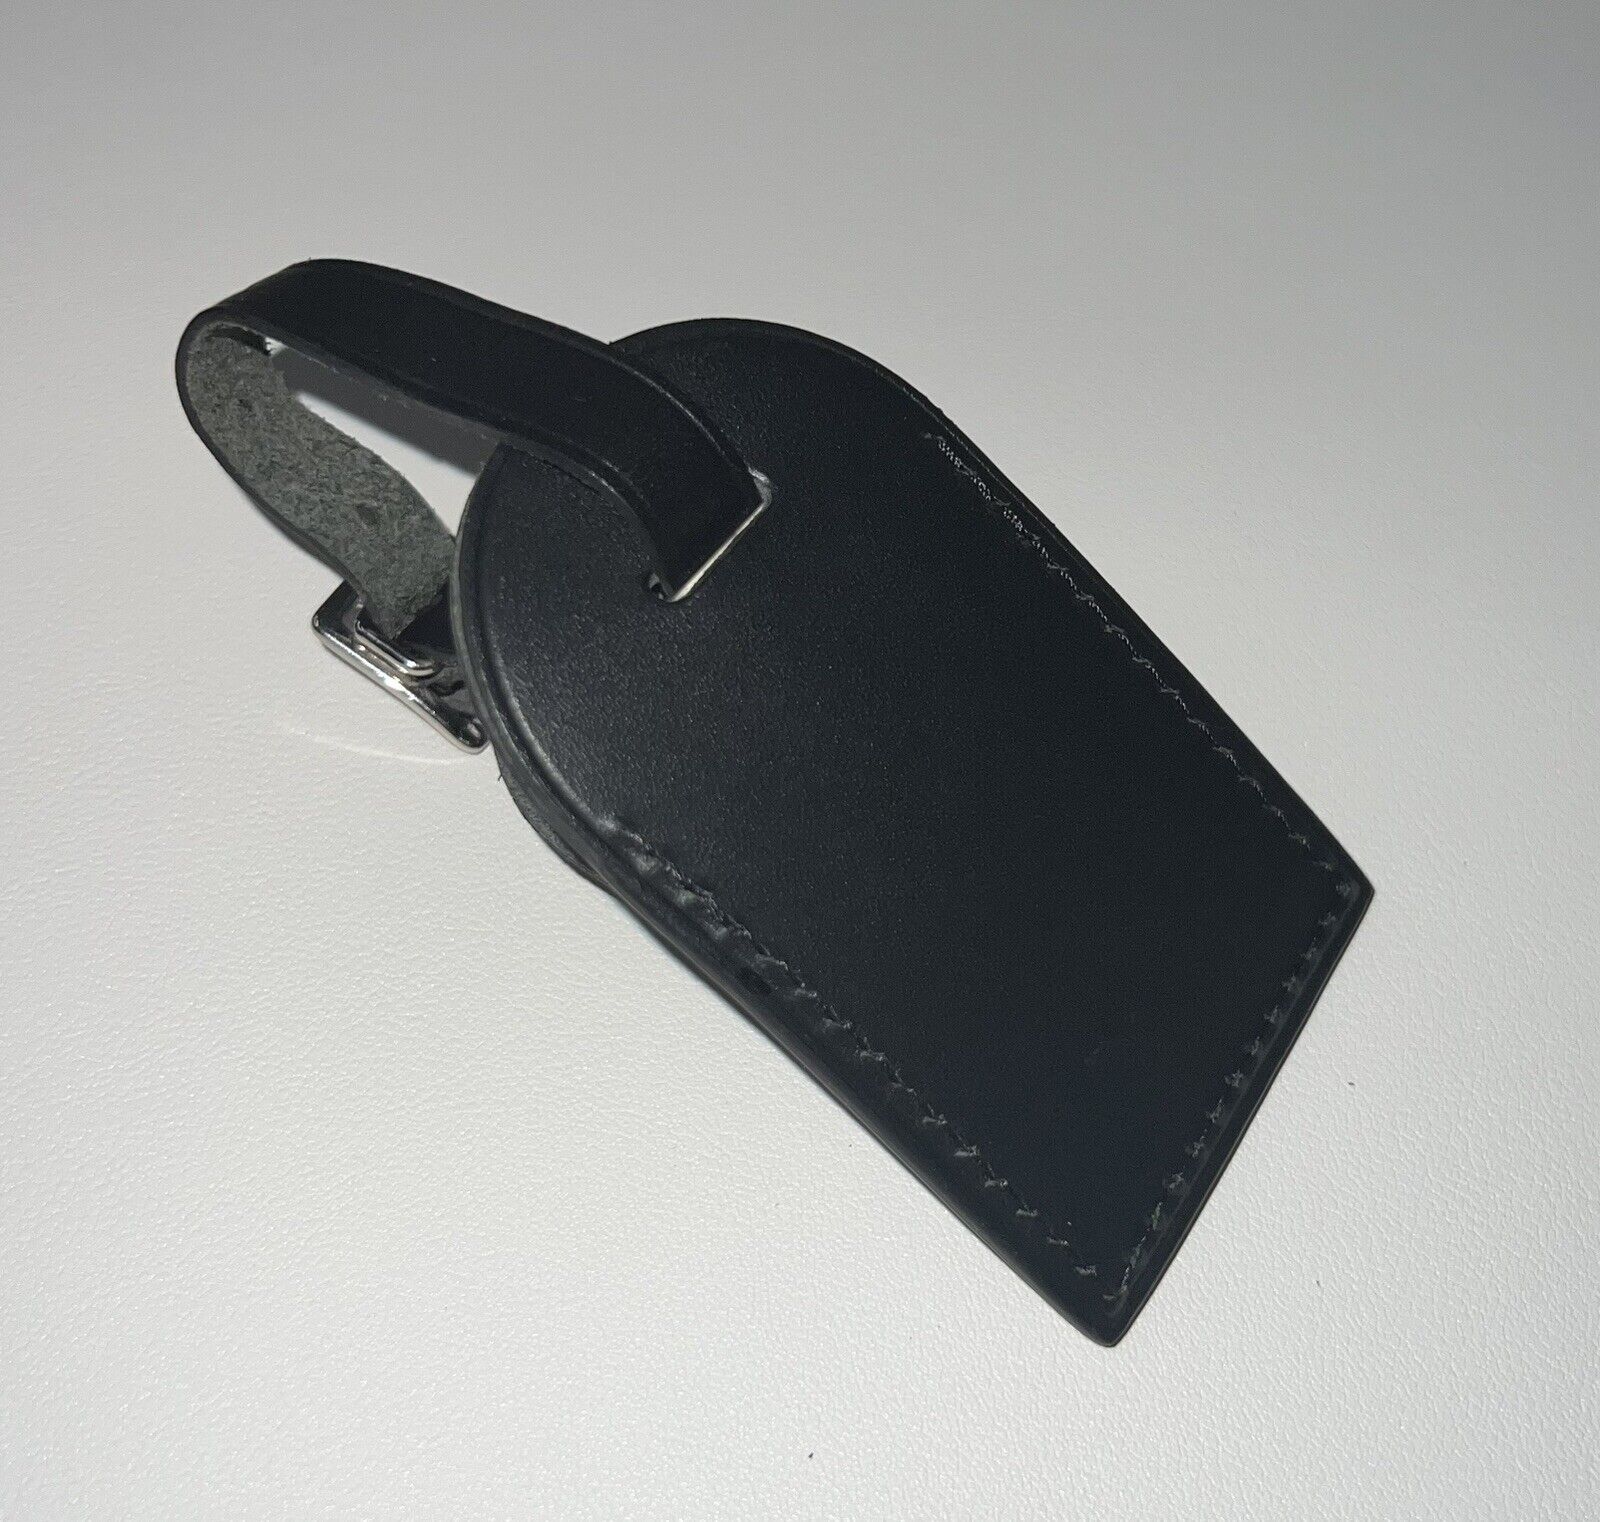 Louis Vuitton Luggage Tag w/ SU Initials Large Black Leather Metal Silvertone